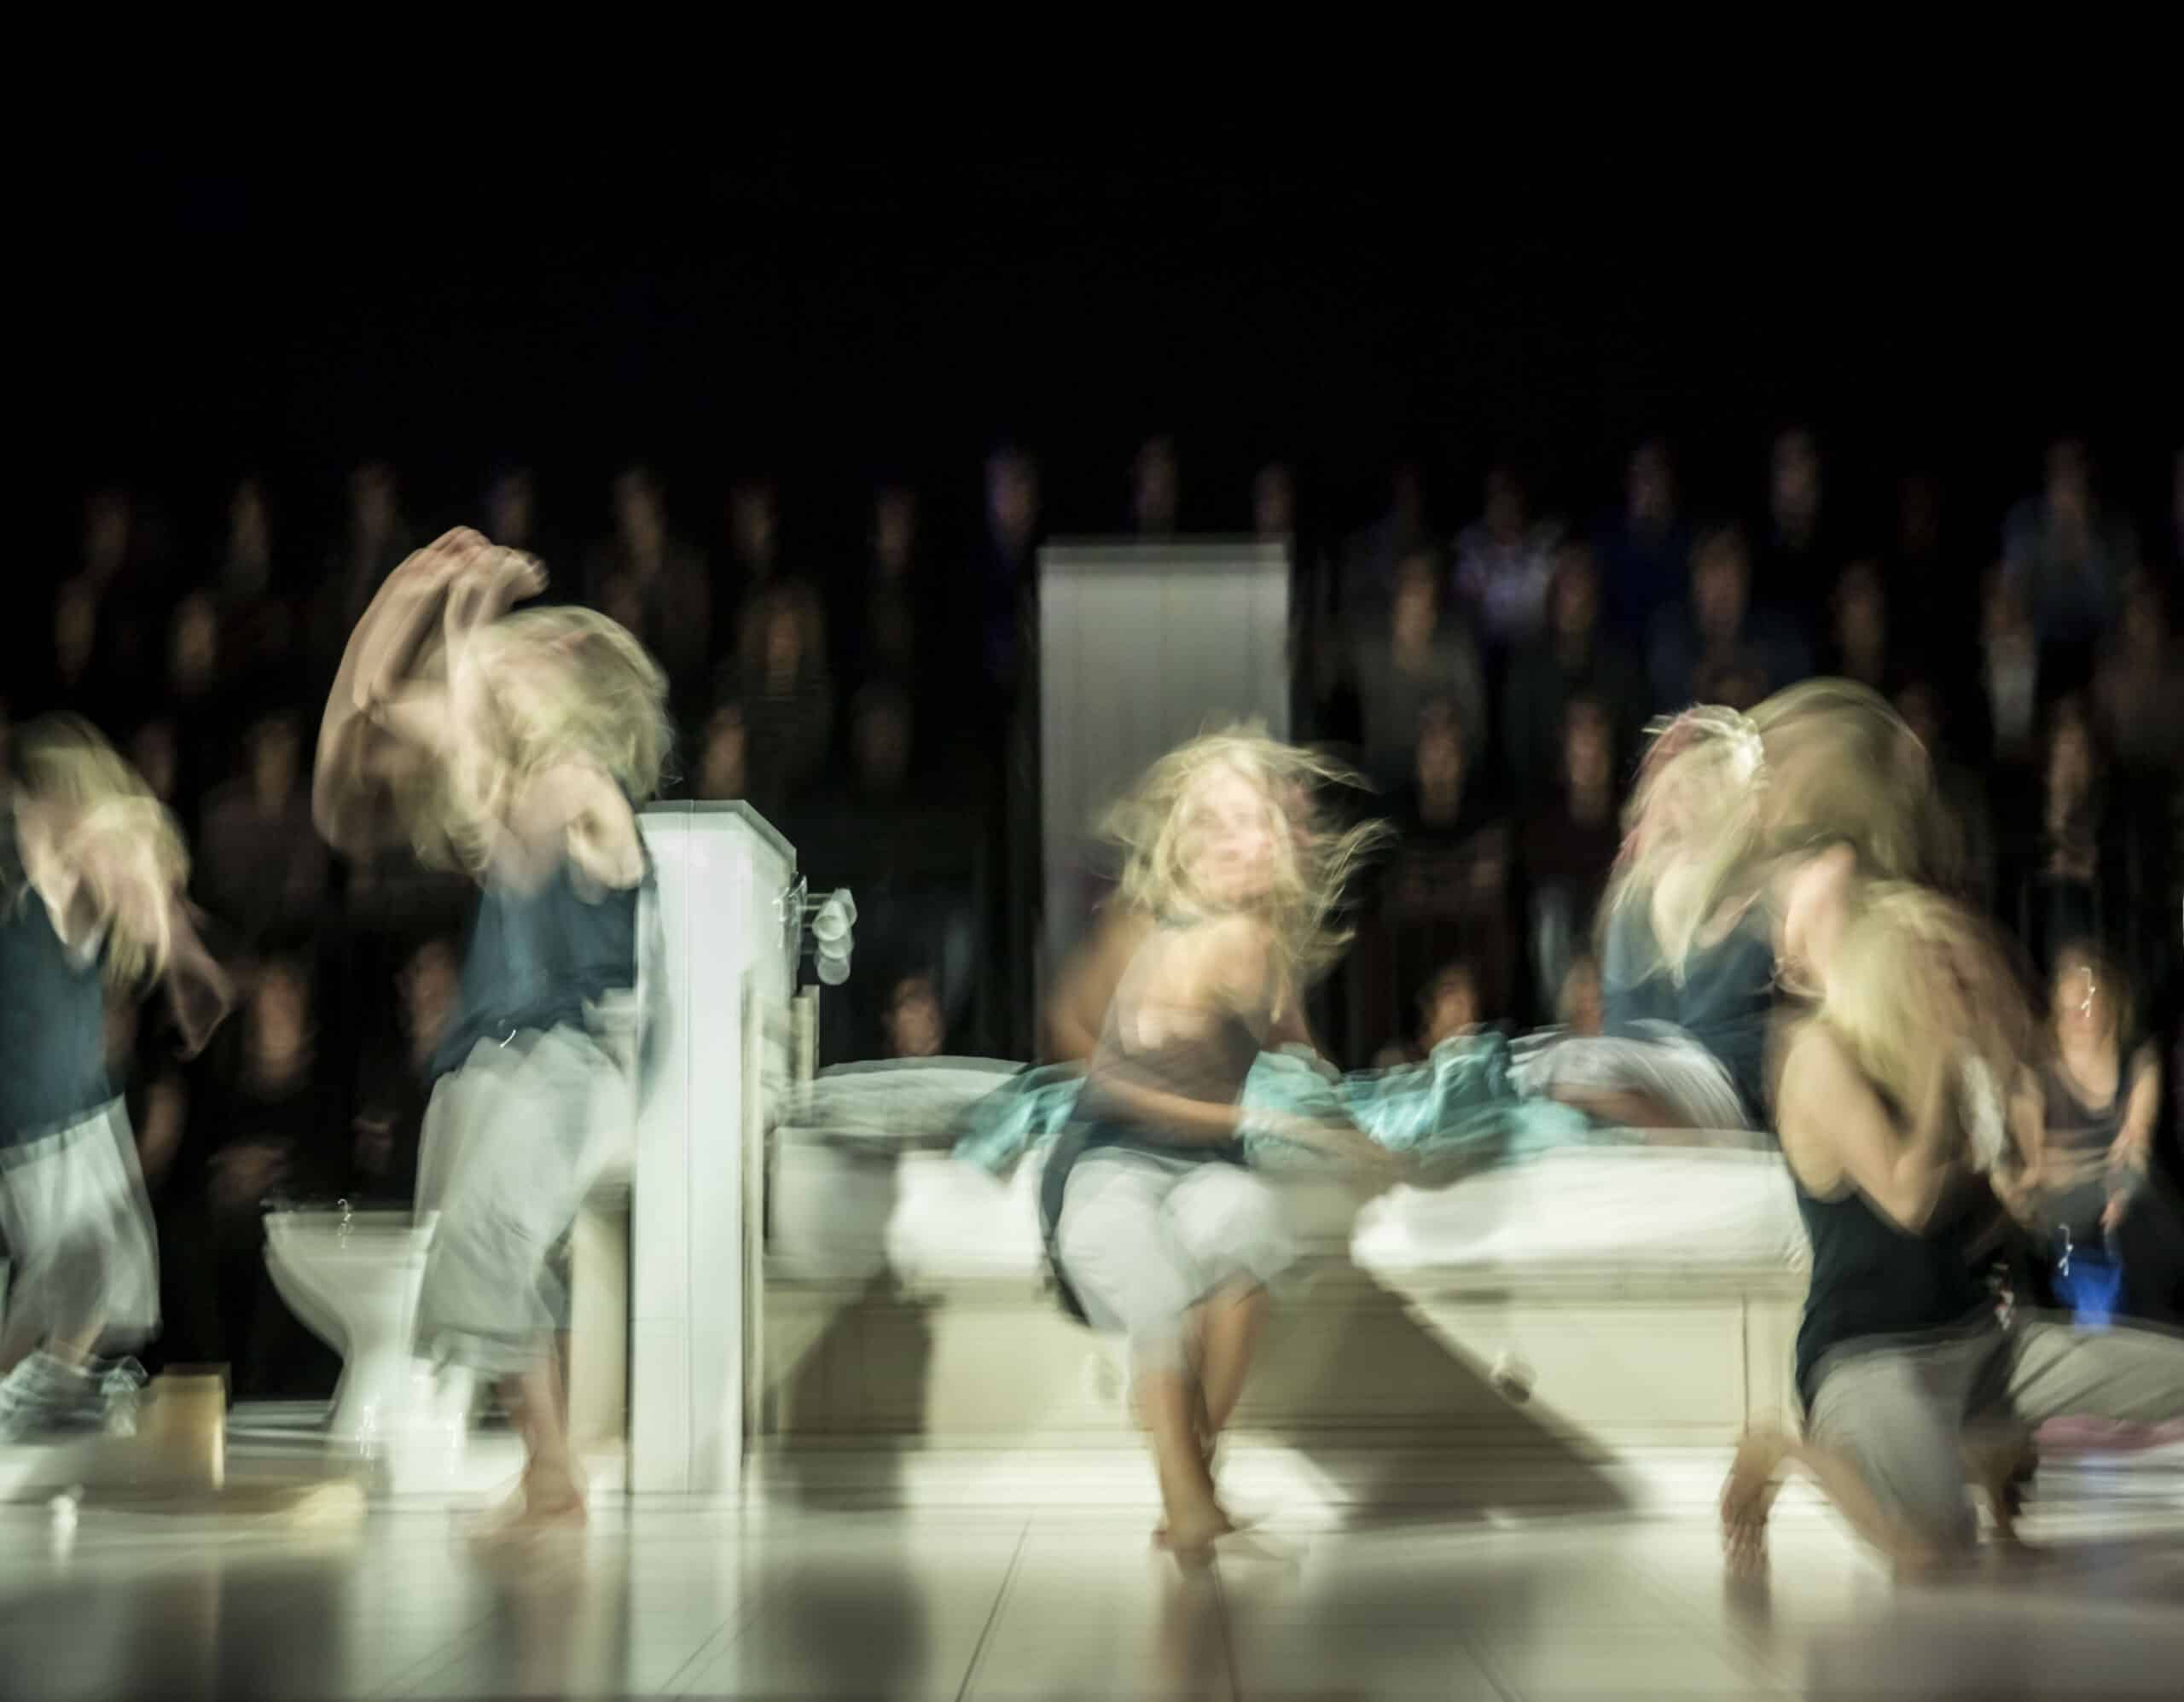 Long exposure of performers on stage, mid-performance